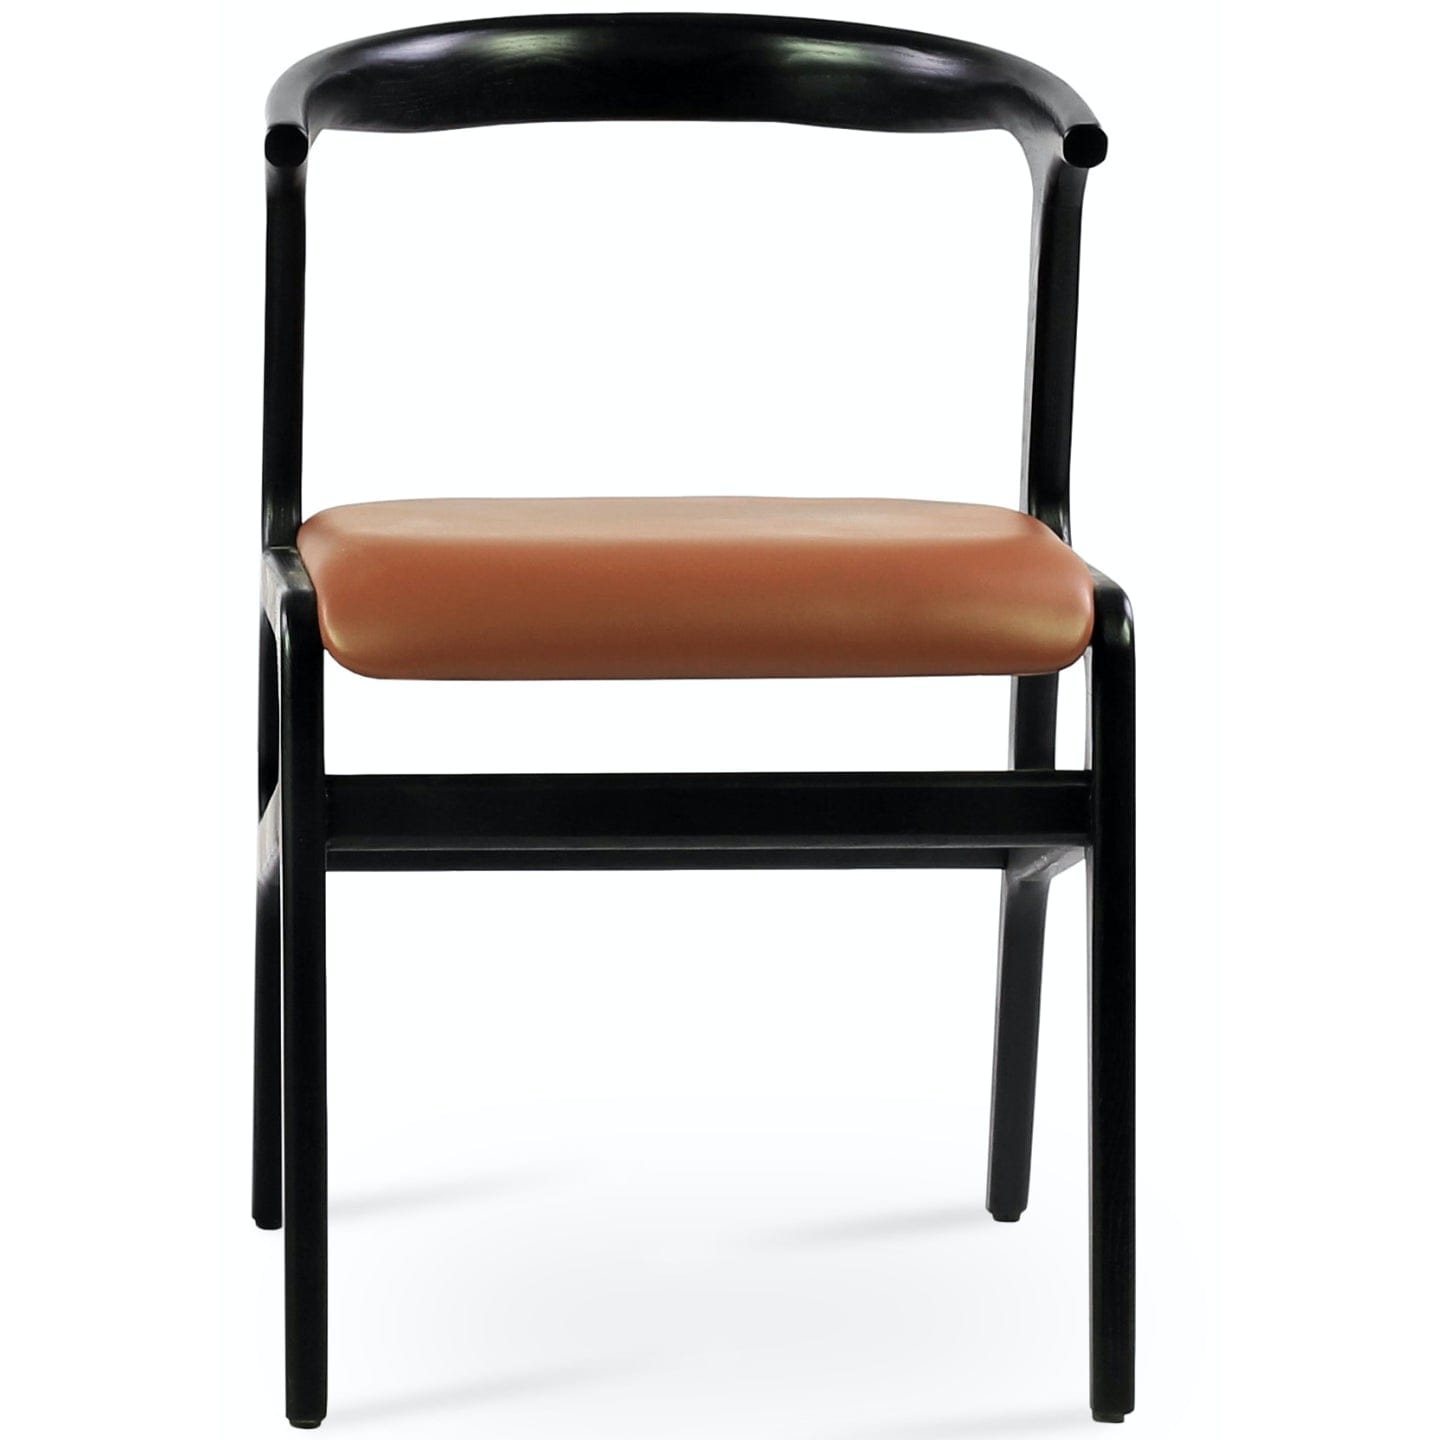 Soho Concept morelato-armchair-black-wood-base-faux-leather-seat-dining-chair-in-hazelnut